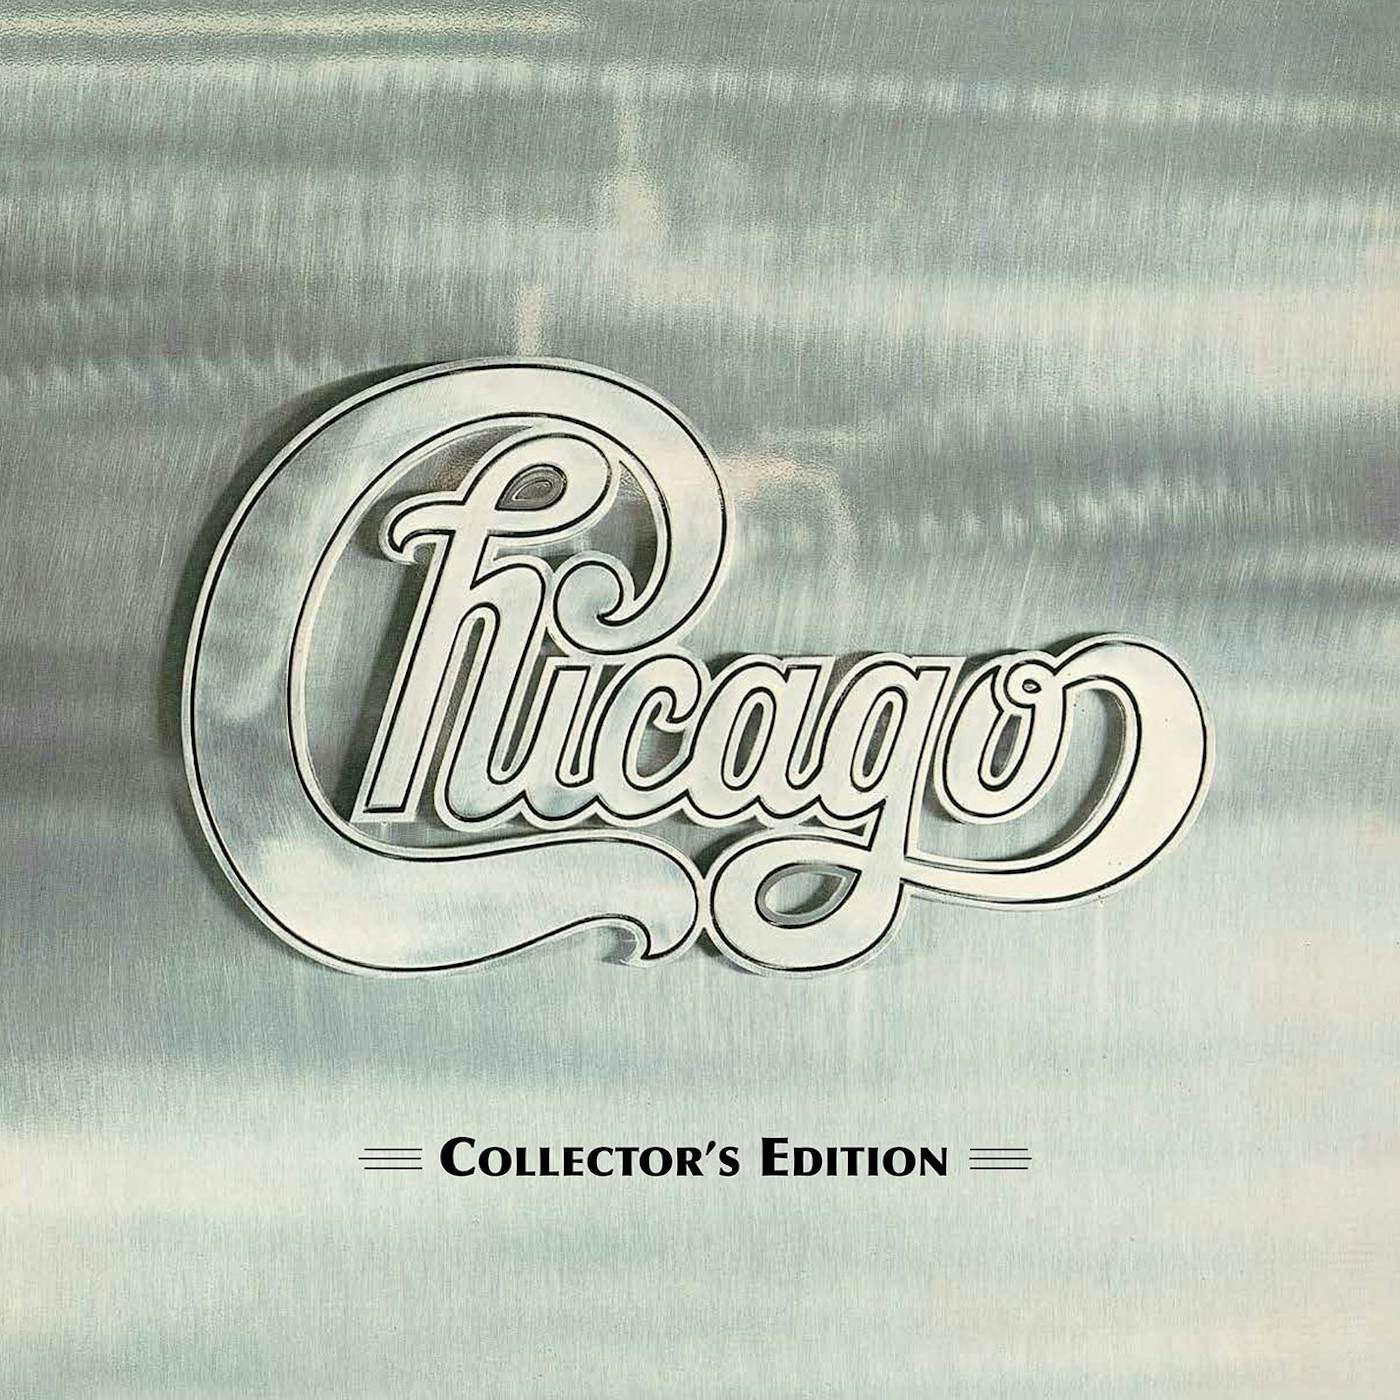 CHICAGO II COLLECTOR'S EDITION CD